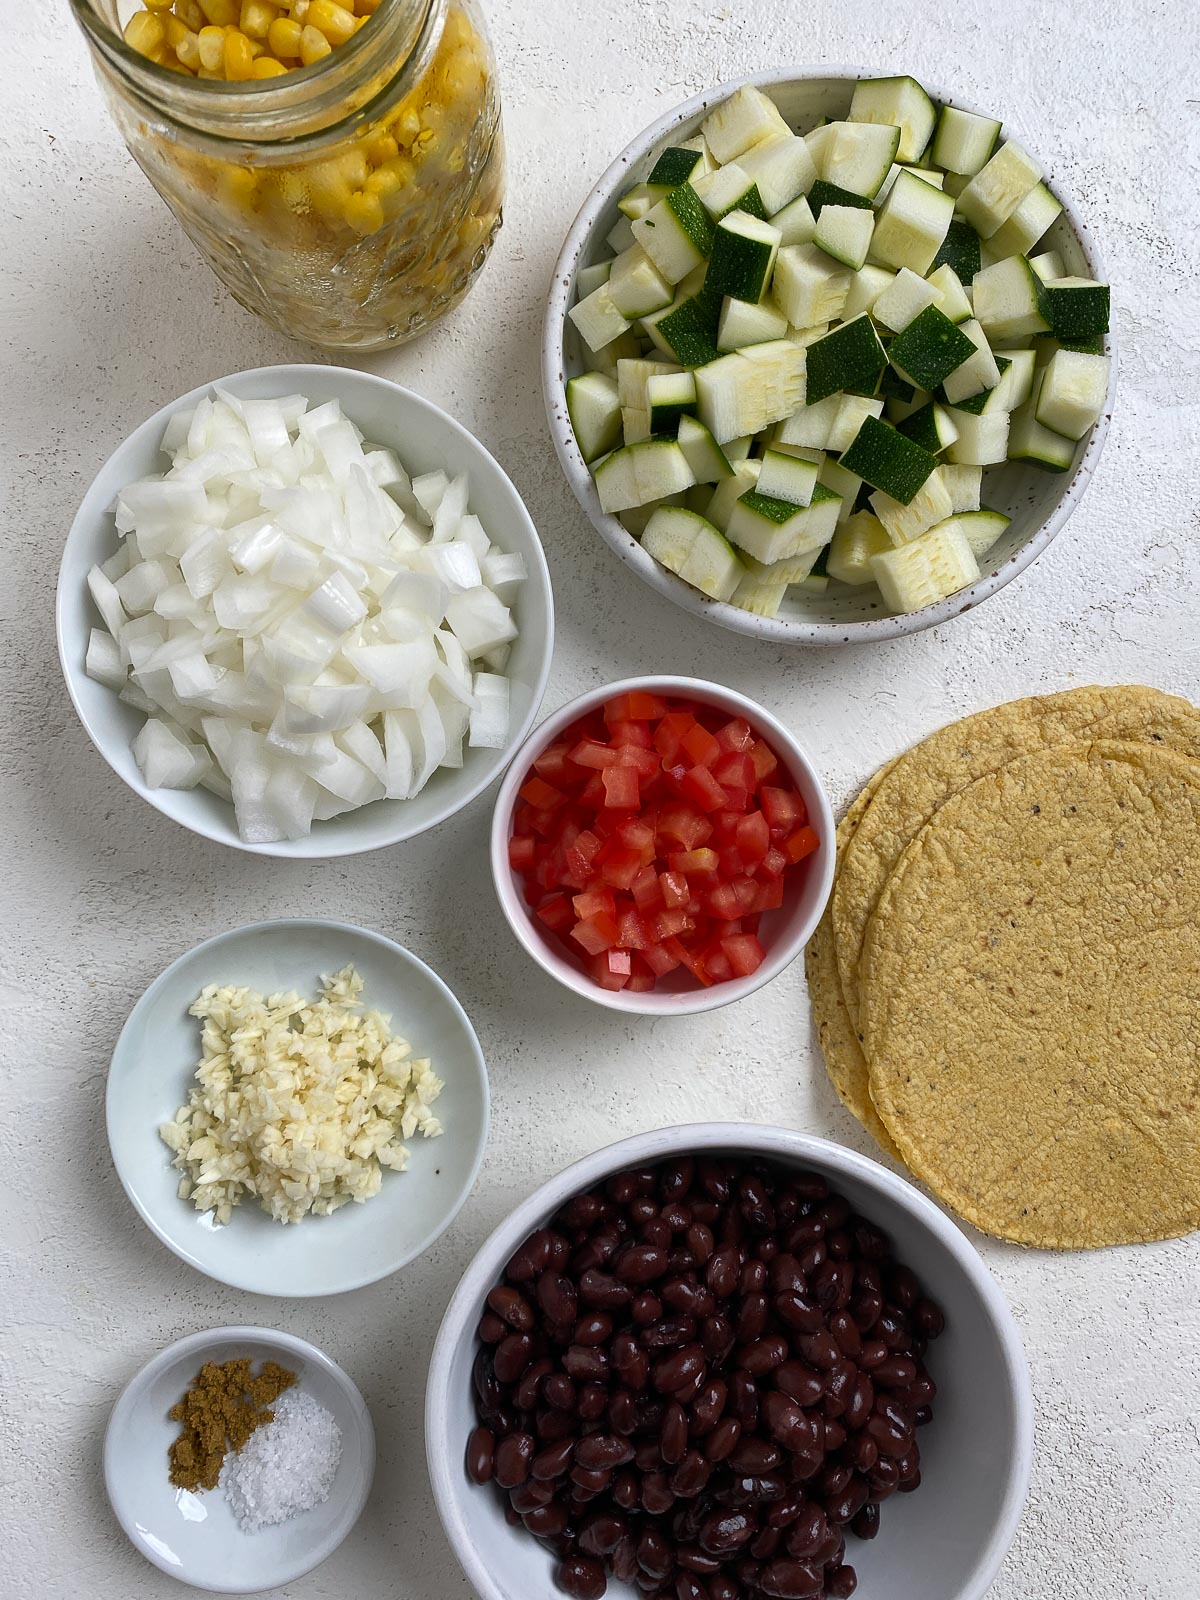 ingredients for Vegan Black Bean Tacos with Veggies measured out against a white surface